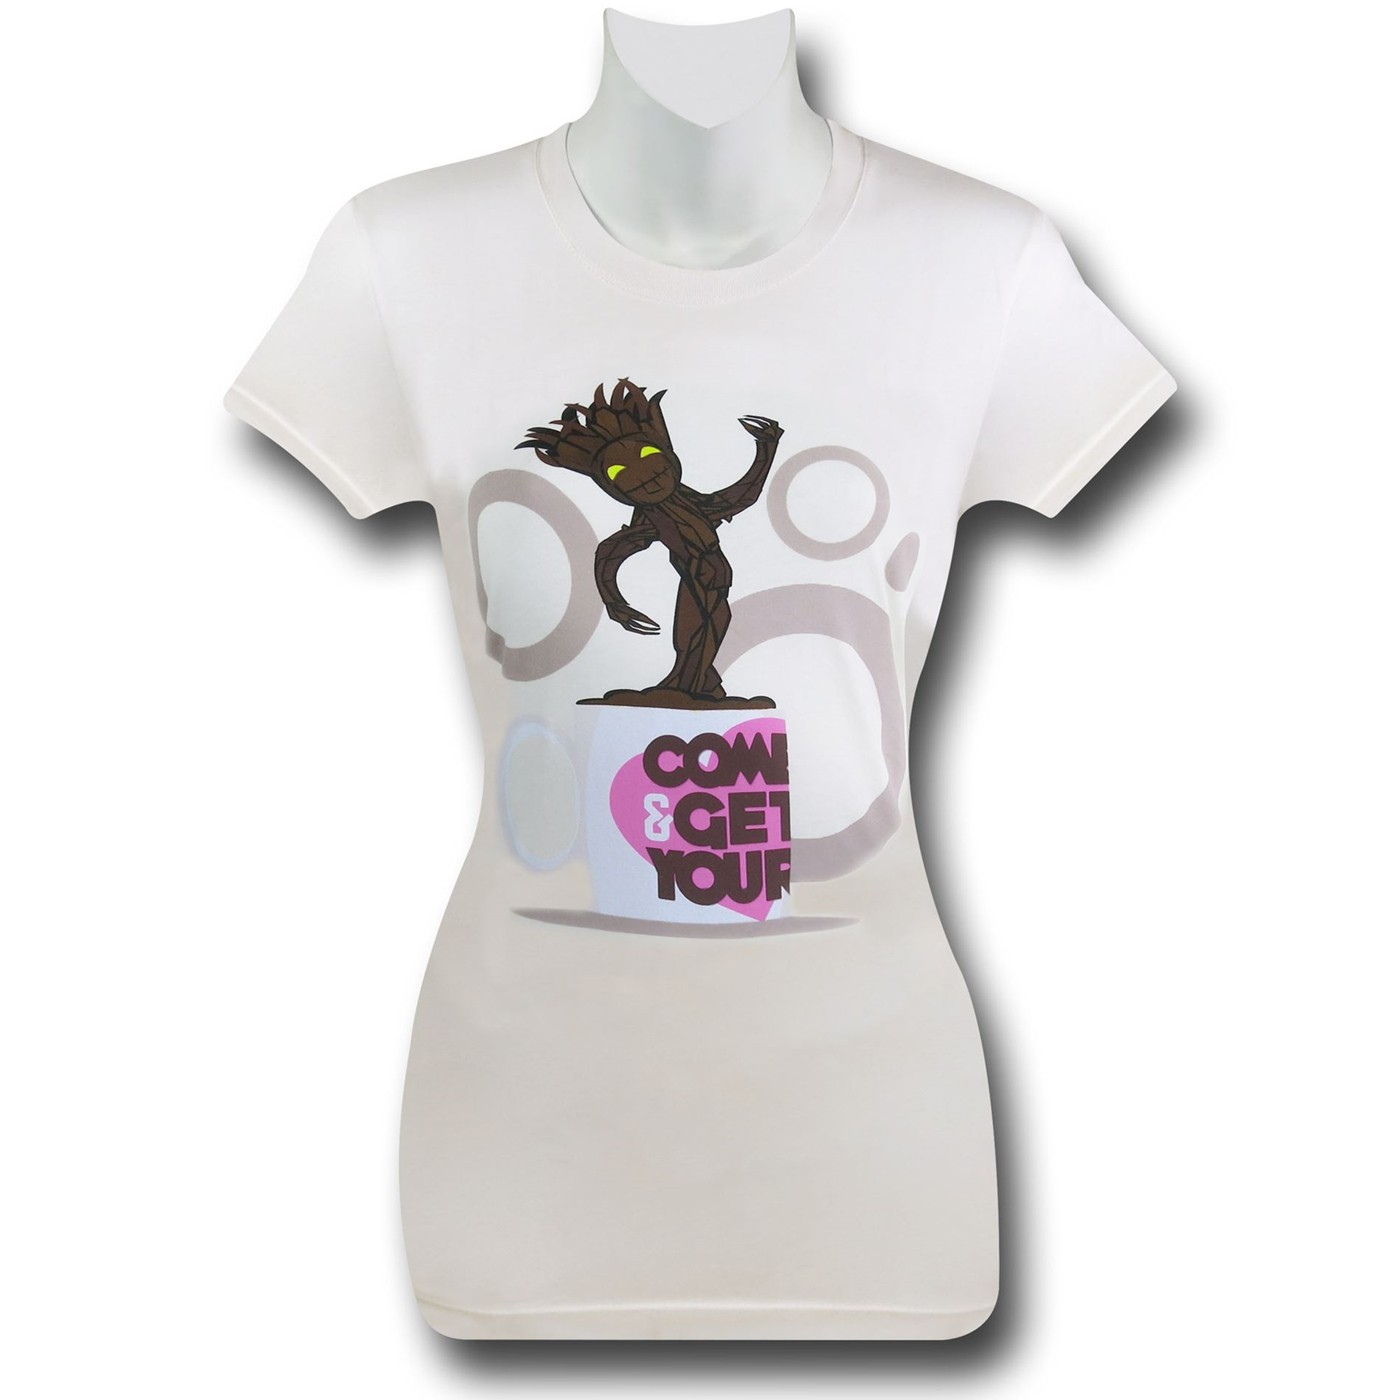 Guardians of the Galaxy Cup of Groot Women's T-Shirt